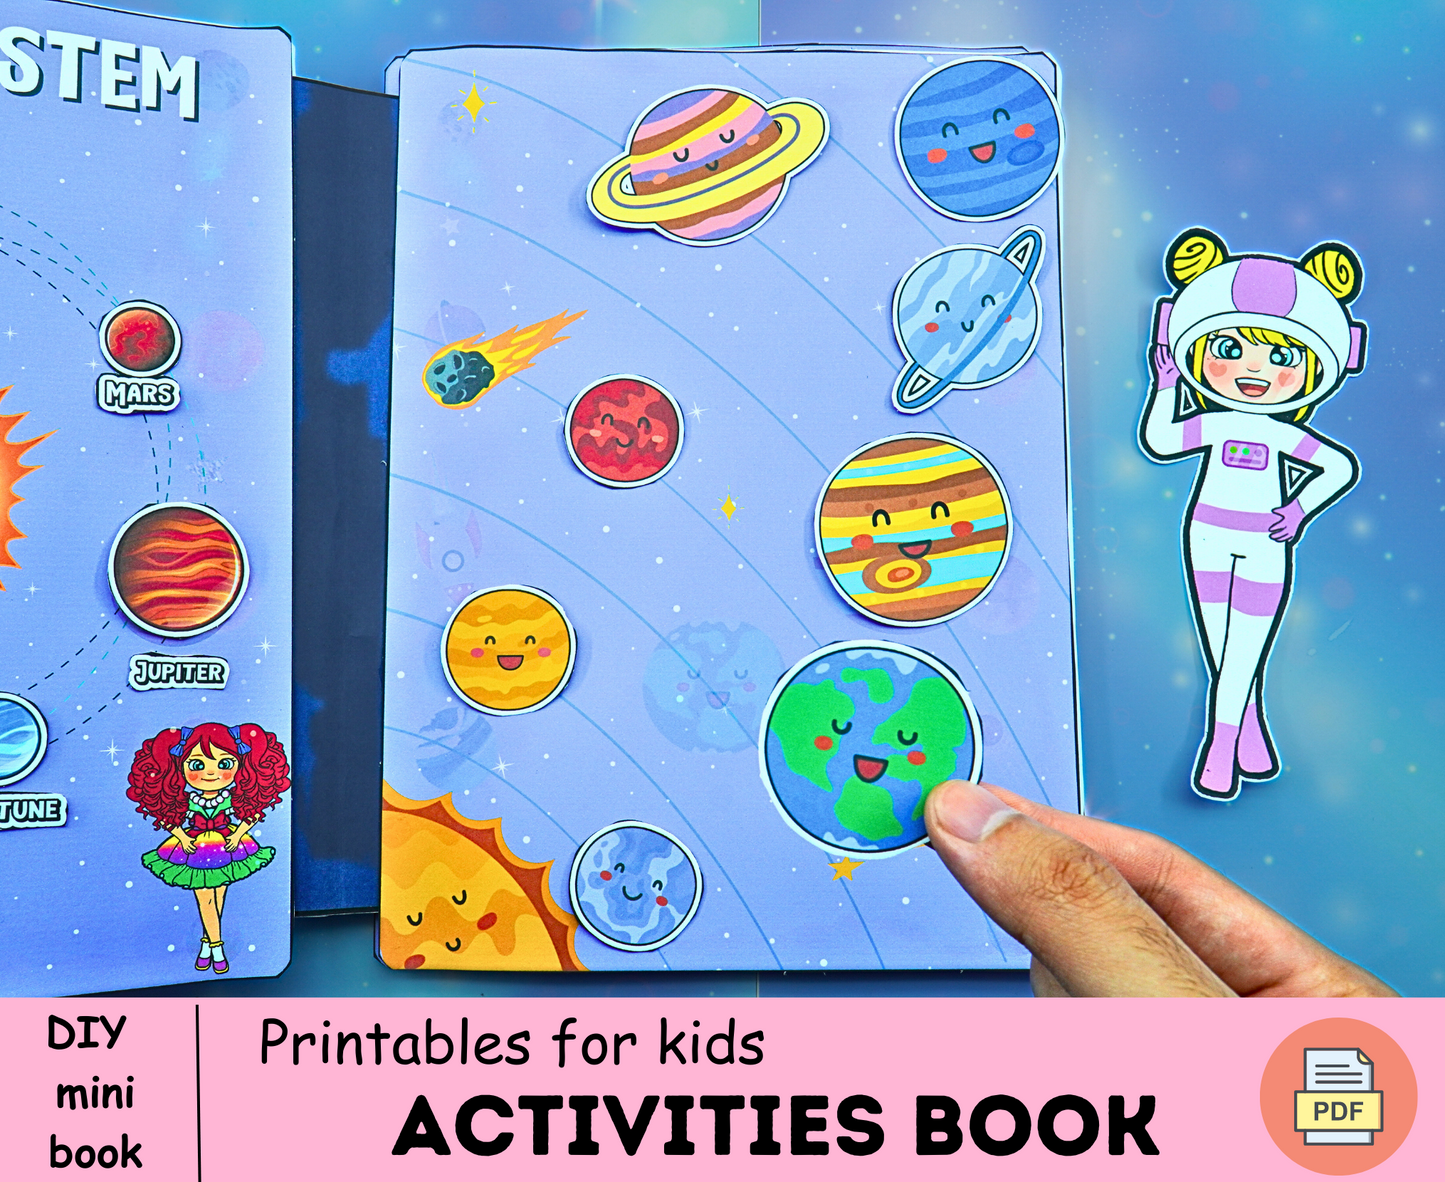 Solar System Busy Book Outer Space Learning Binder Personalized Space Book Printable Preschool Worksheets Flash Cards Homeschool Resources 🌈 Woa Doll Crafts